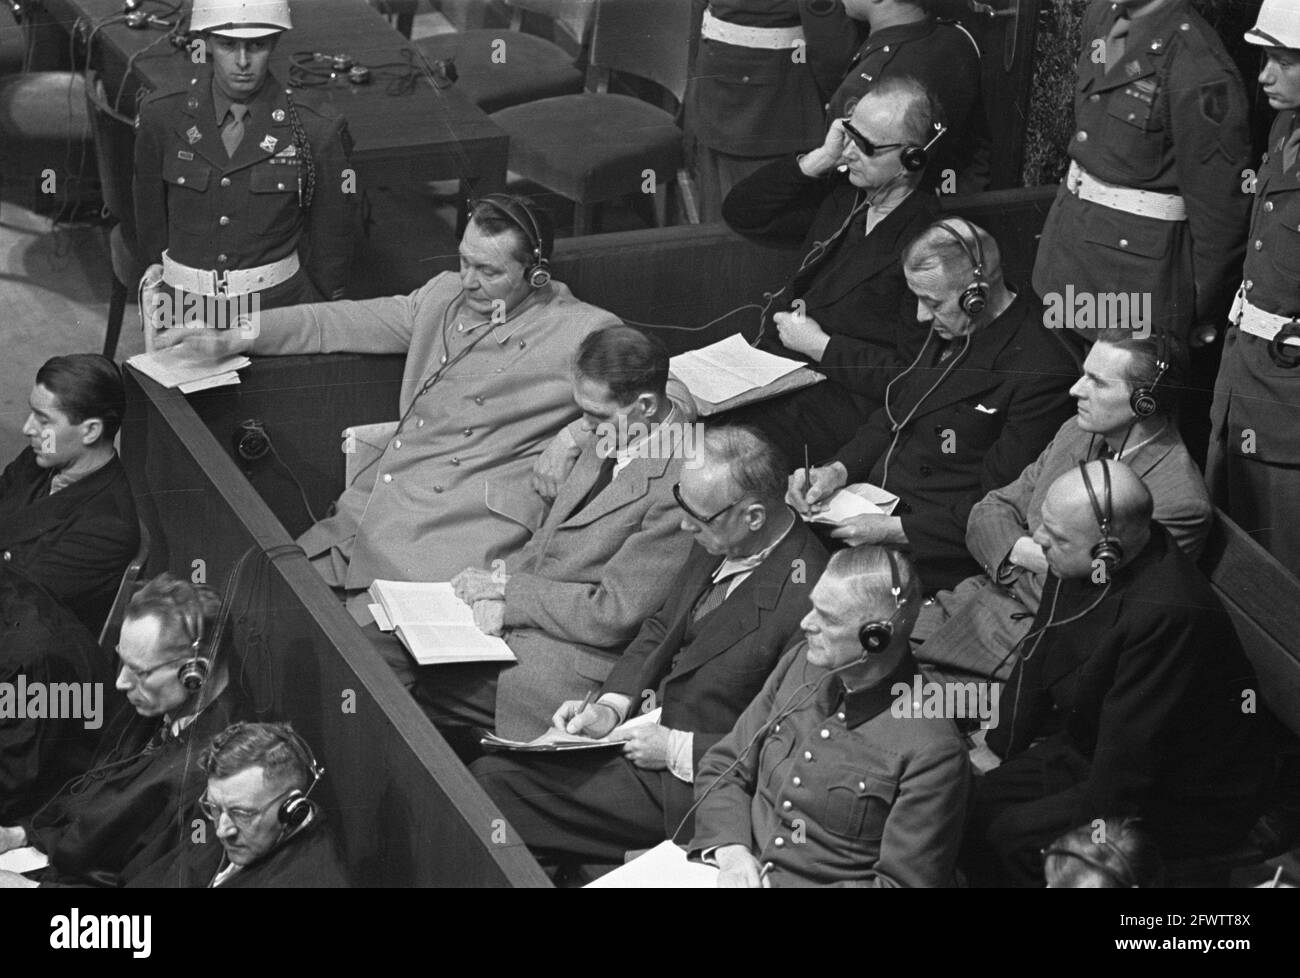 Nuremberg trial, December 4, 1945, war criminals, trials, justice, second world war, The Netherlands, 20th century press agency photo, news to remember, documentary, historic photography 1945-1990, visual stories, human history of the Twentieth Century, capturing moments in time Stock Photo